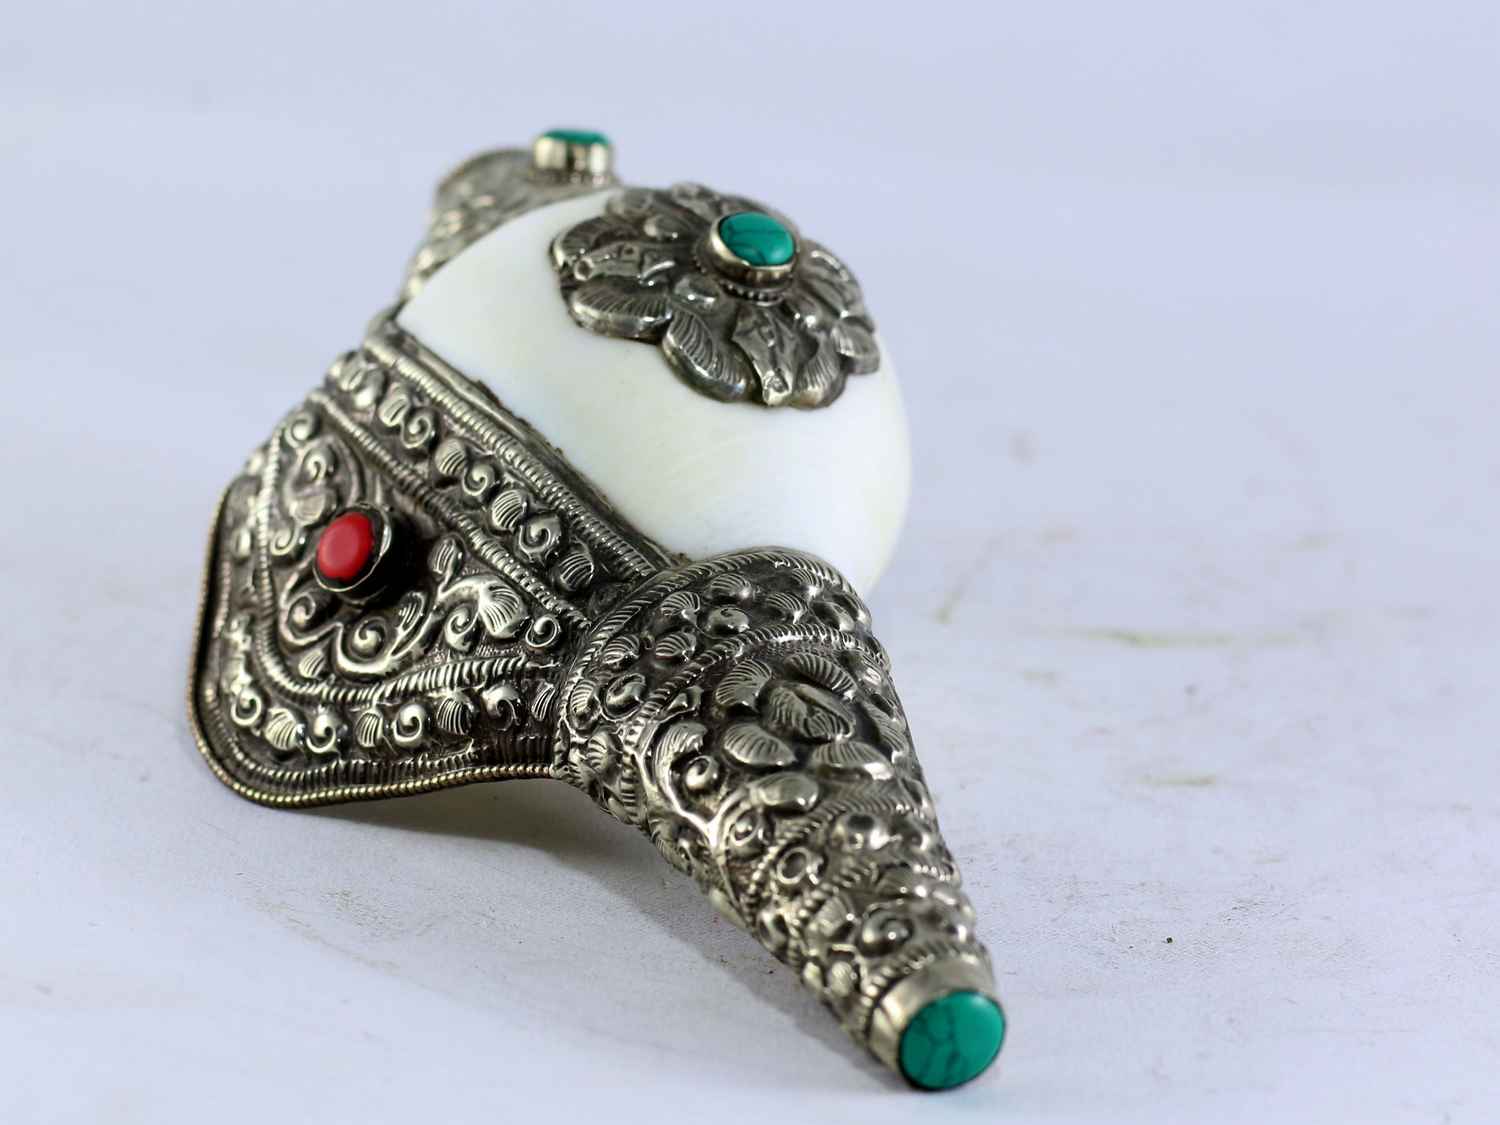 White Metal Conch Shell With Flower Design